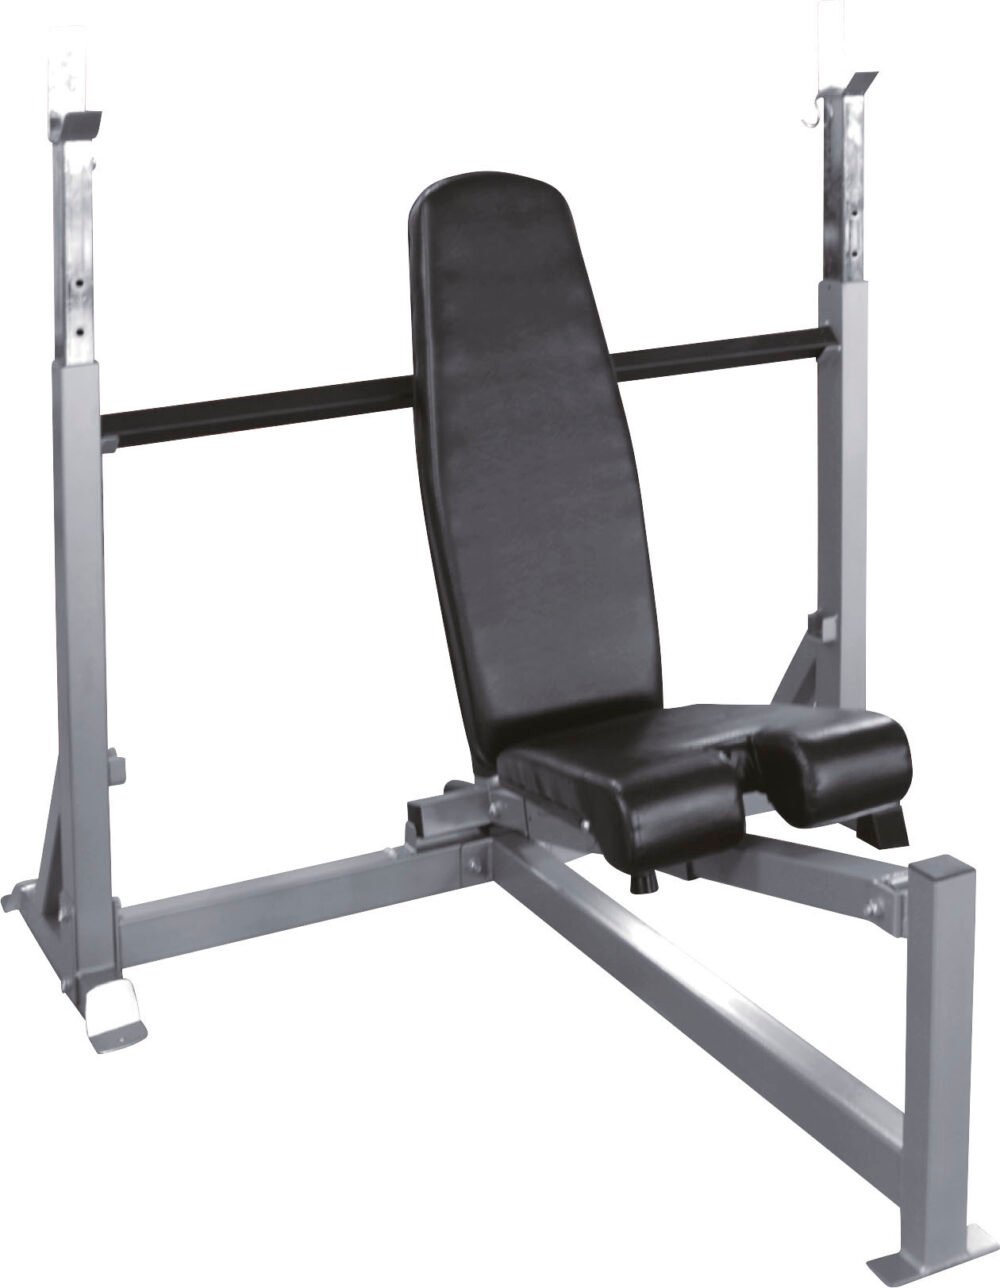 ADJUSTABLE OLYMBIC BENCH PRESS